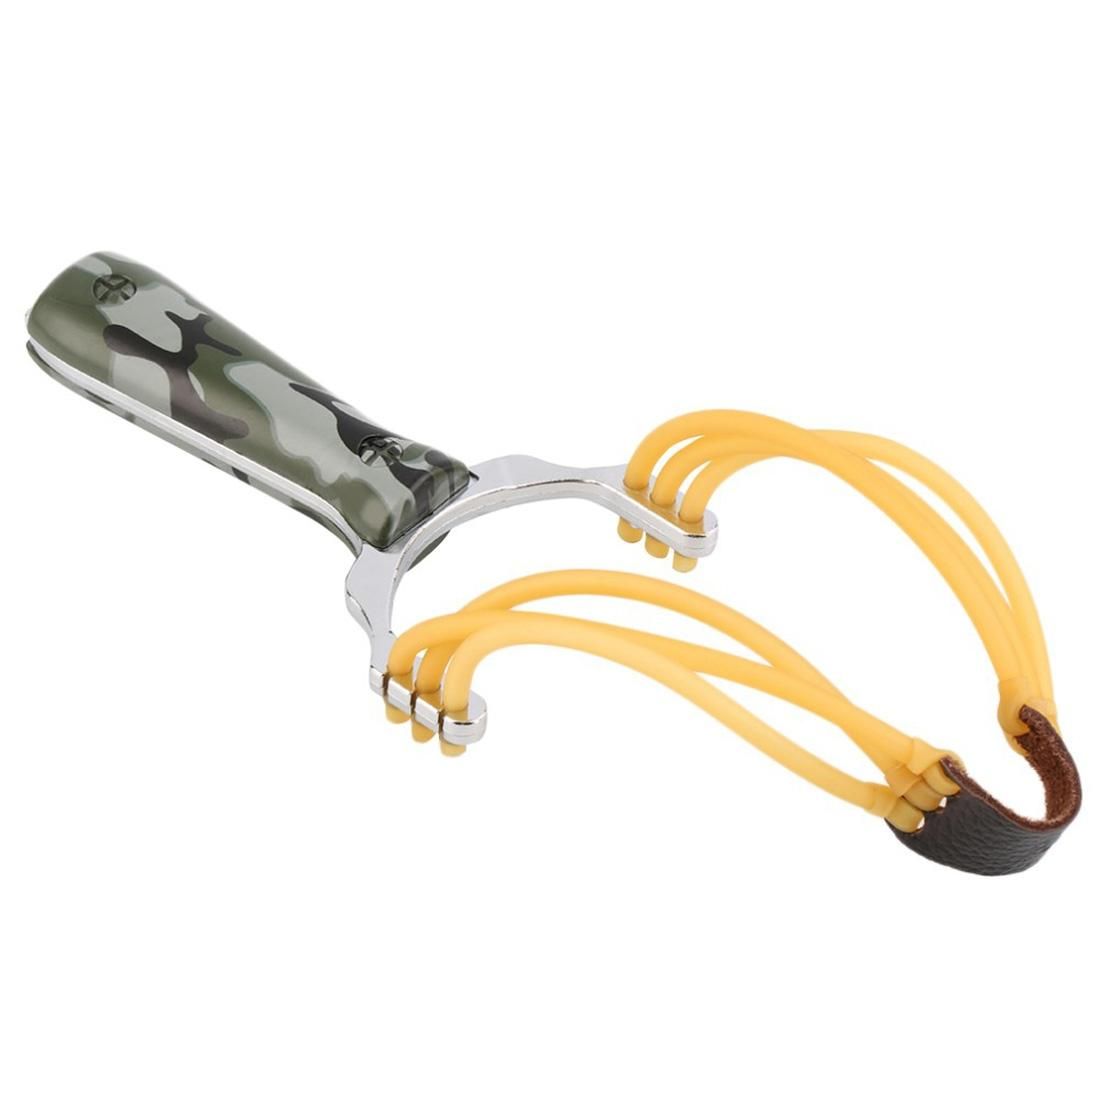 Stainless Powerful Hunting Slingshot Catapult Launcher